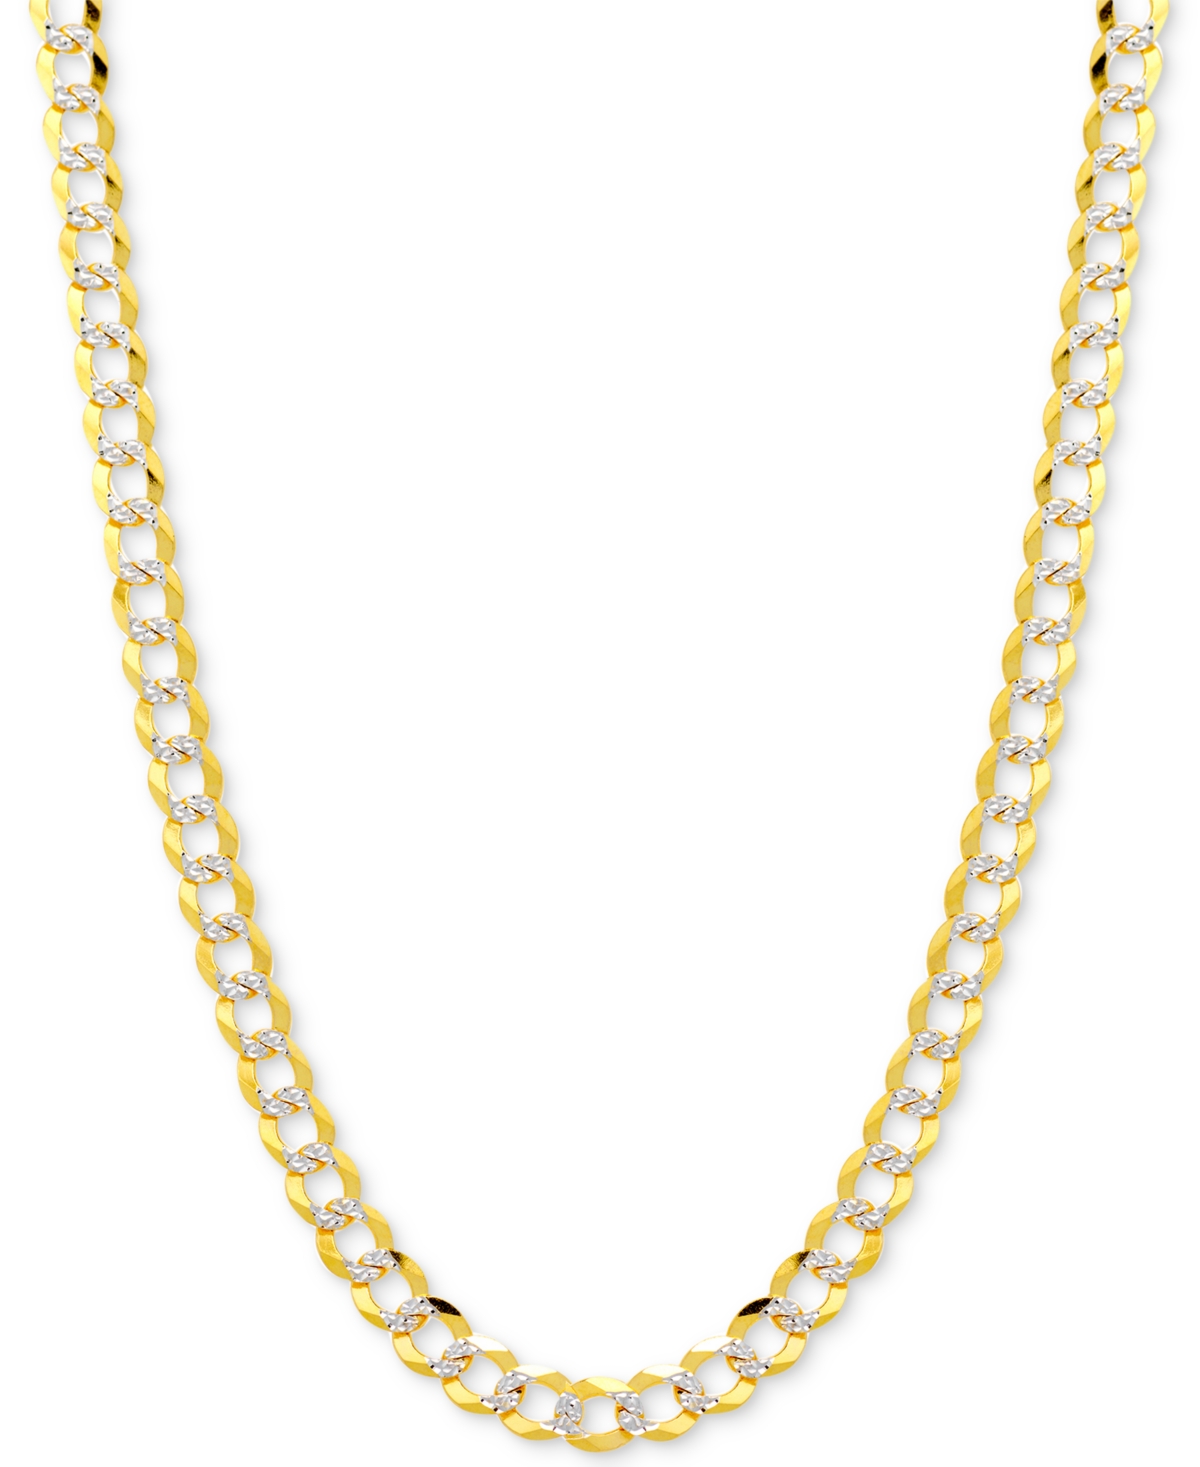 Italian Gold 30" Two-tone Open Curb Link Chain Necklace In Solid 14k Gold & White Gold